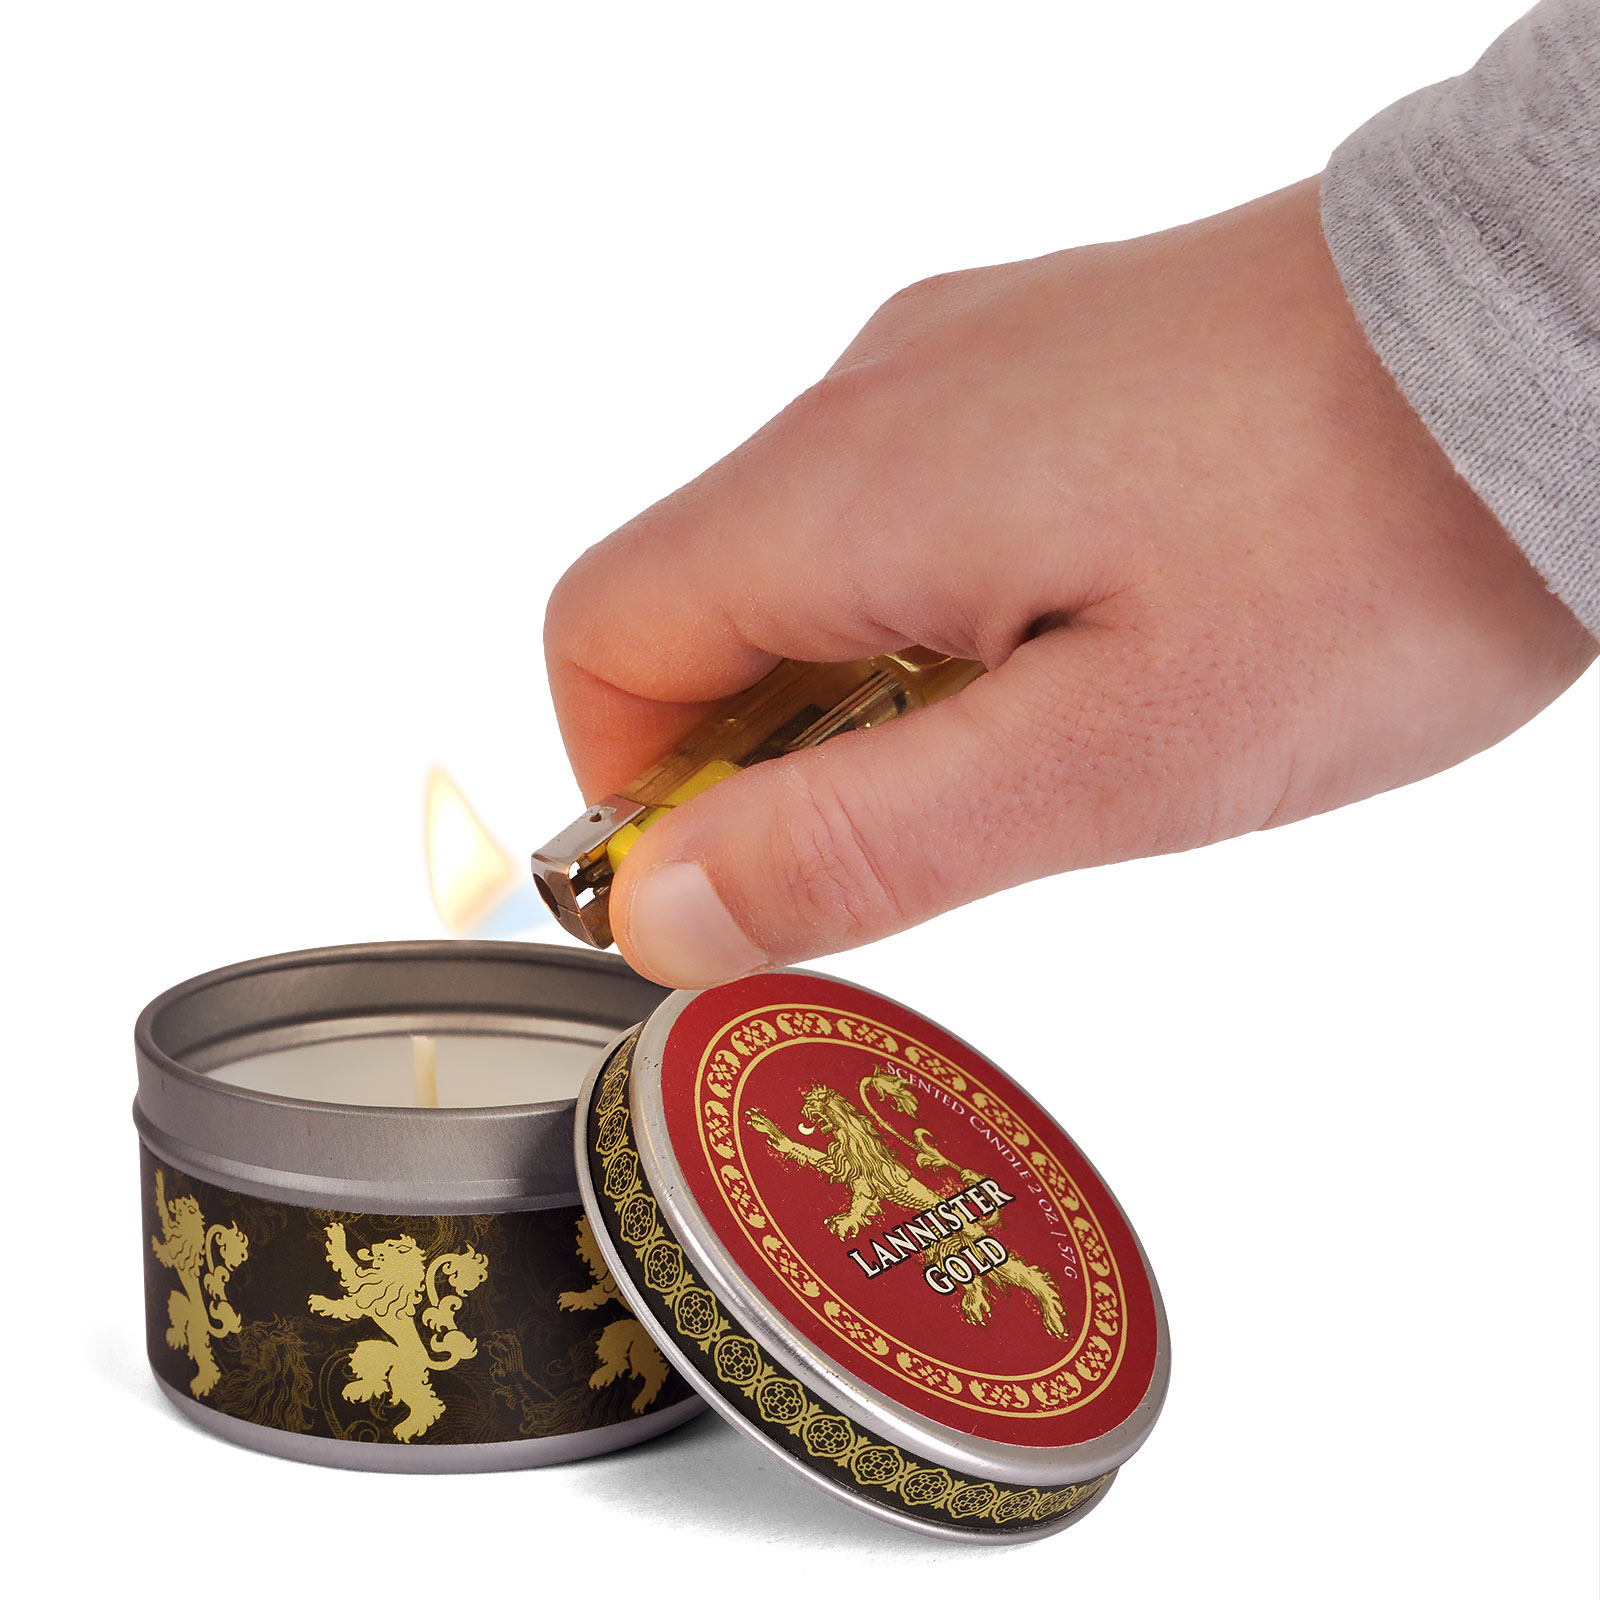 Game of Thrones - Lannister Scented Candle